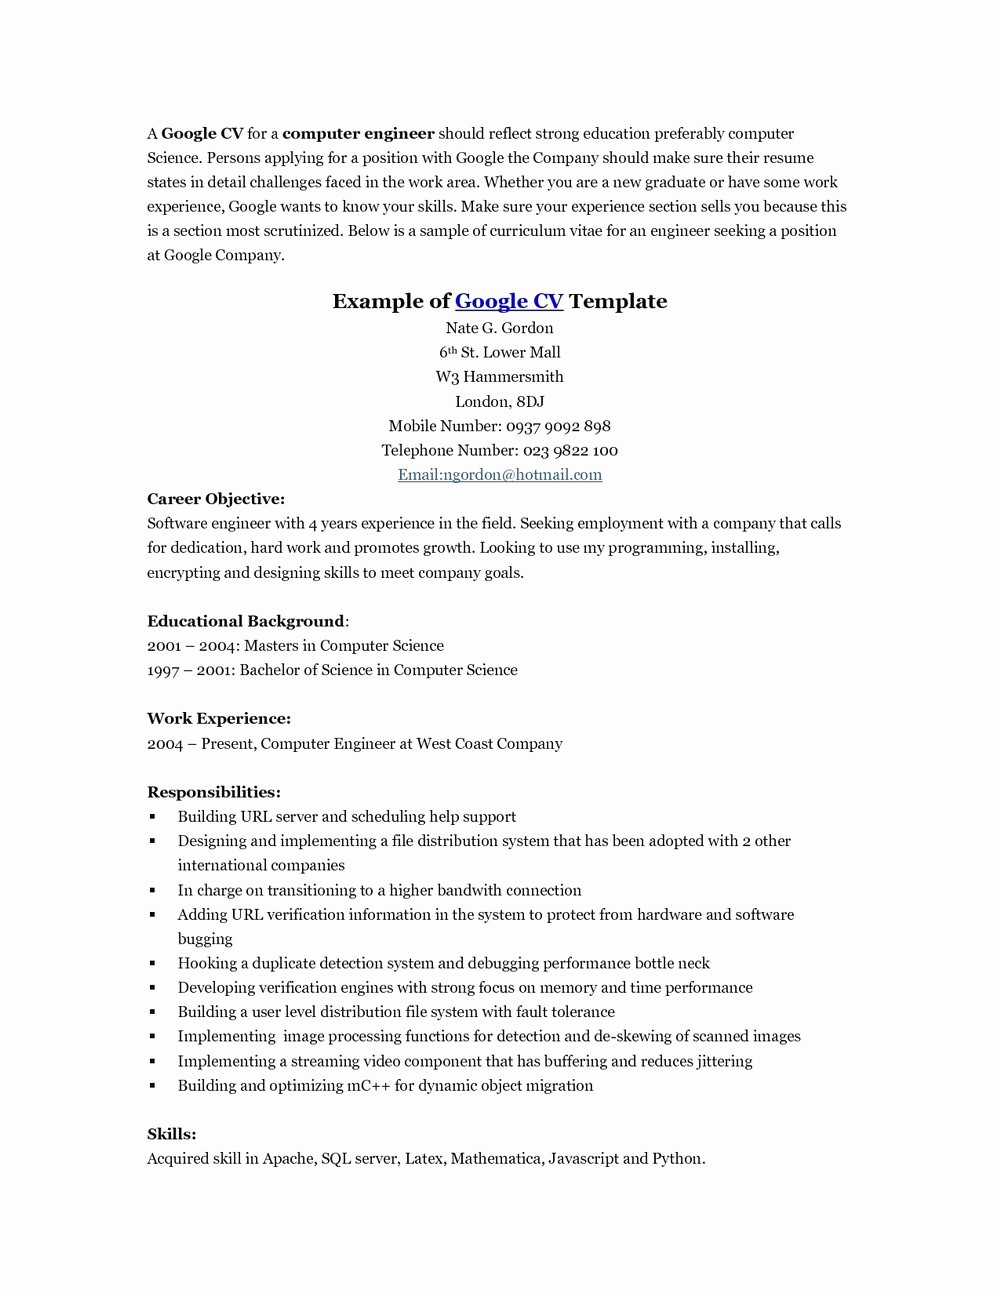 Resume and Cover Letter Templates New Resume Cover Letter Template Free Download Cover Letters